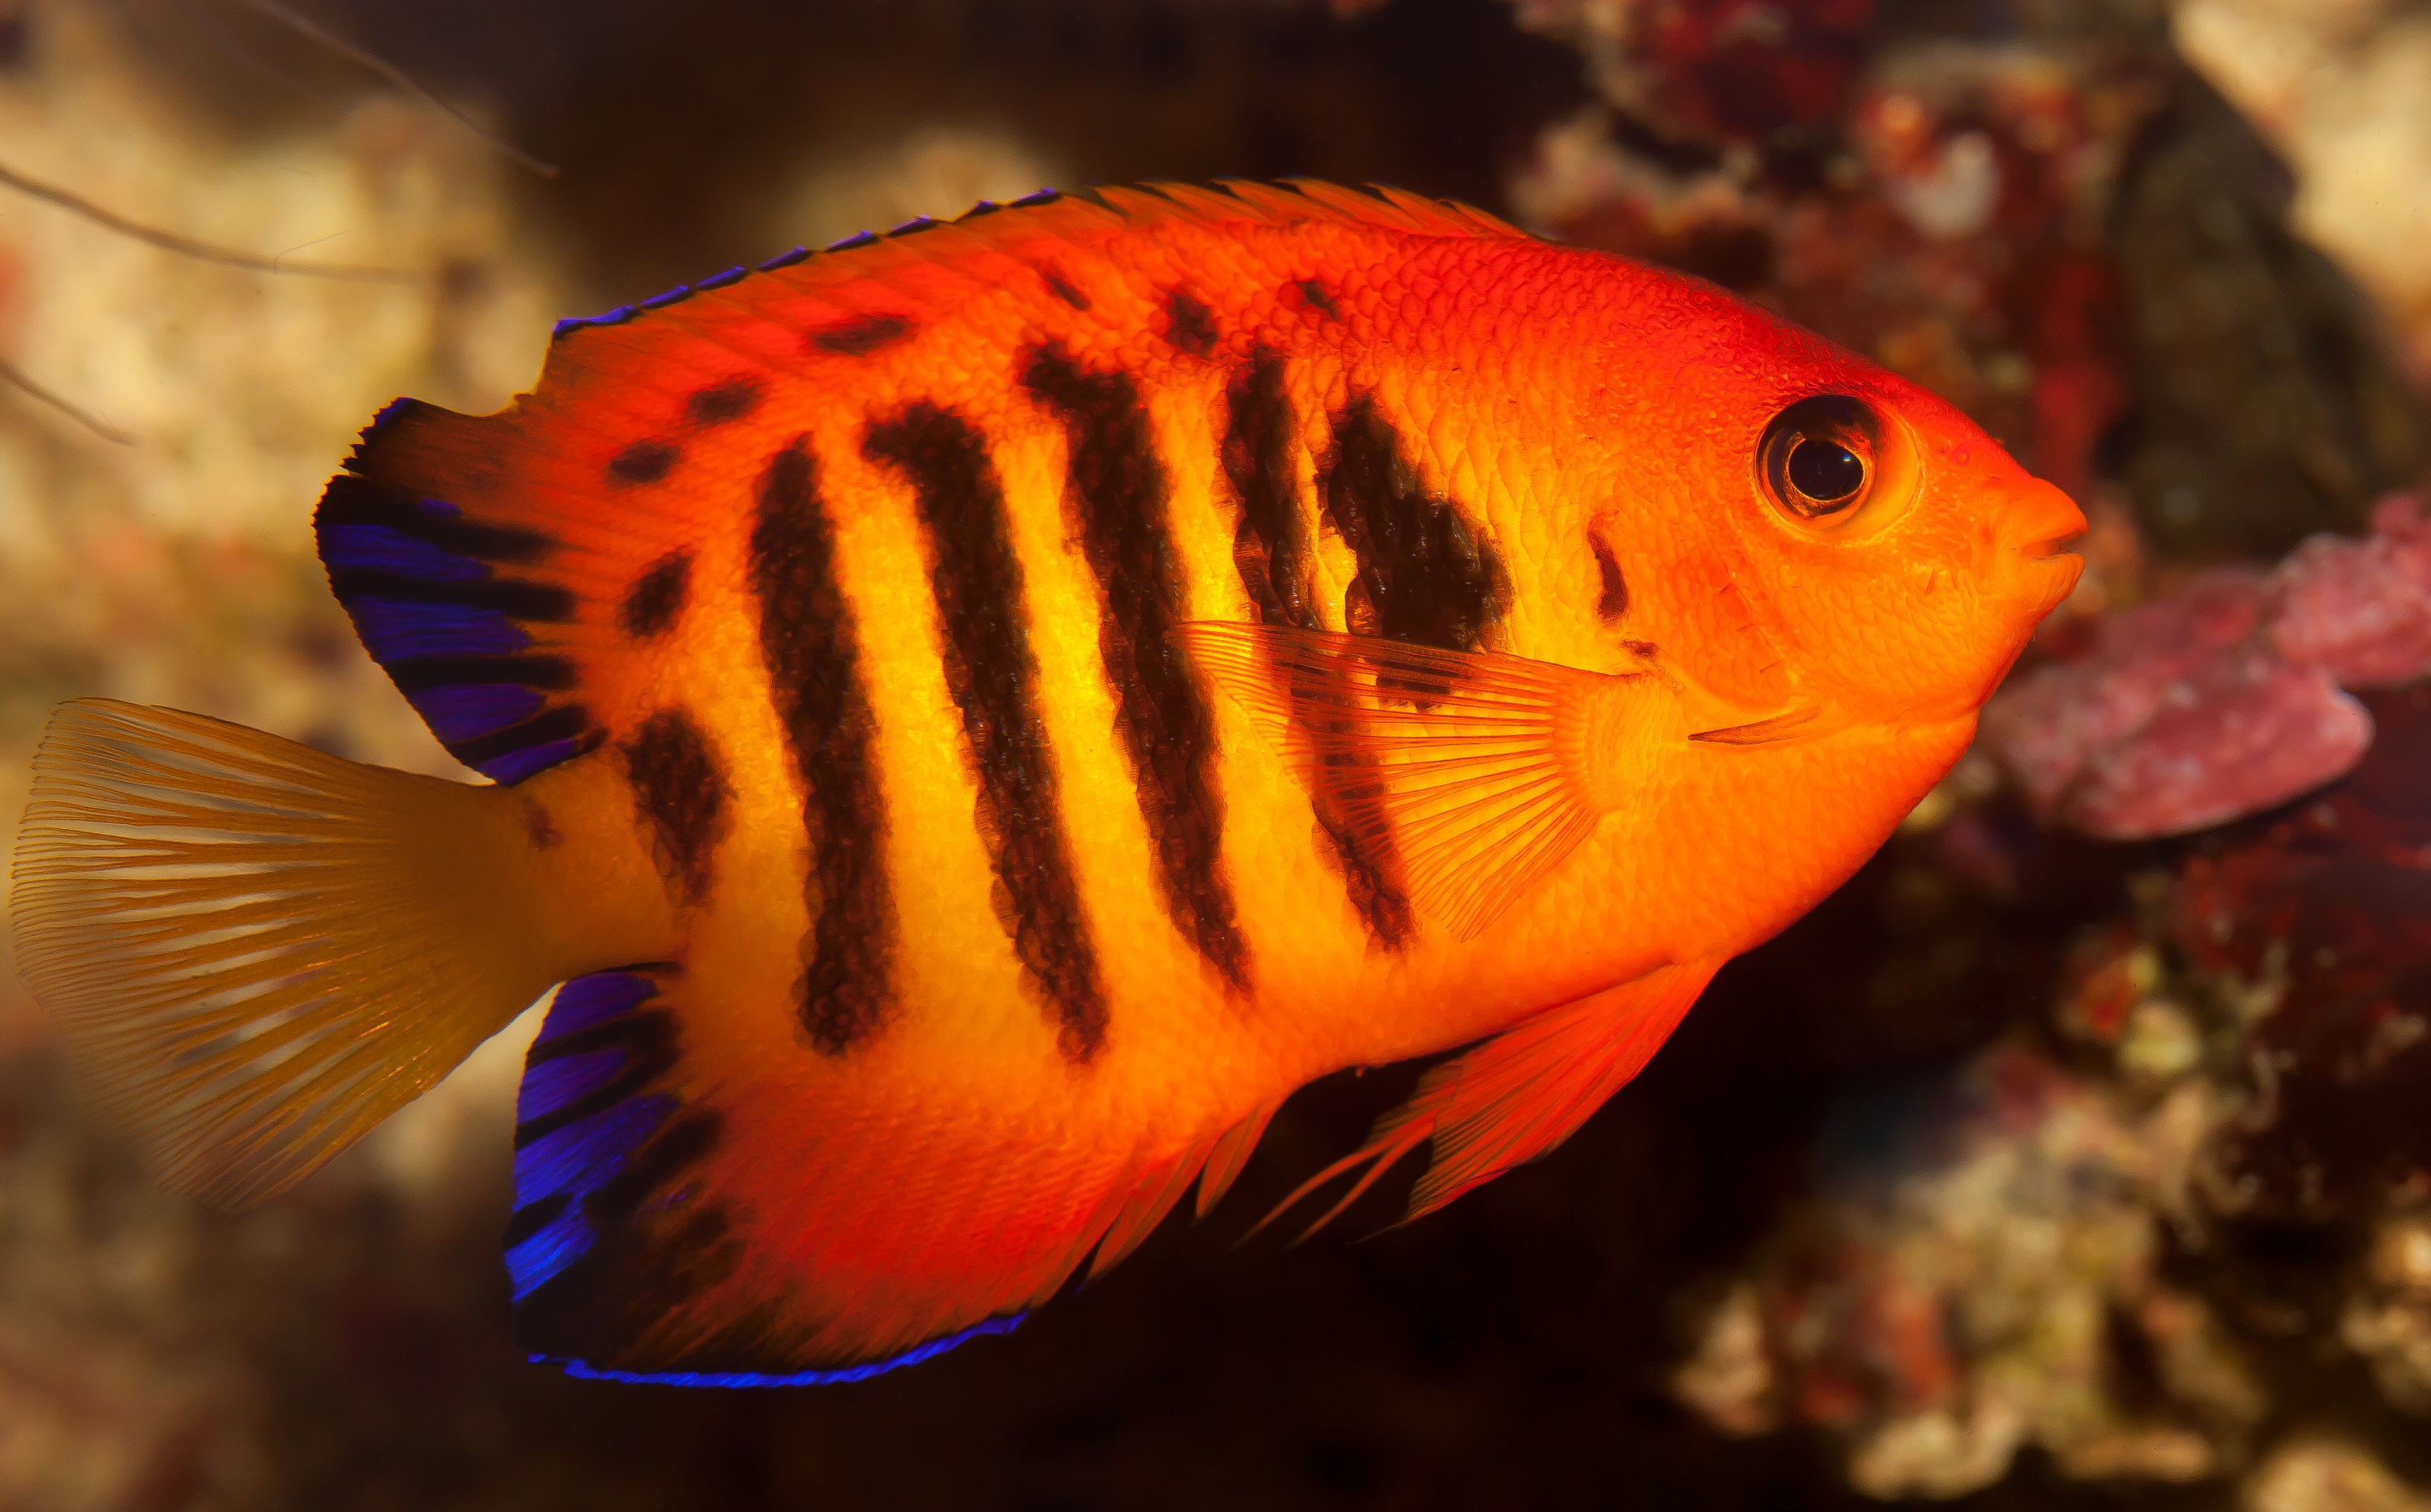 Flame angelfish photo and wallpaper. Cute Flame angelfish picture